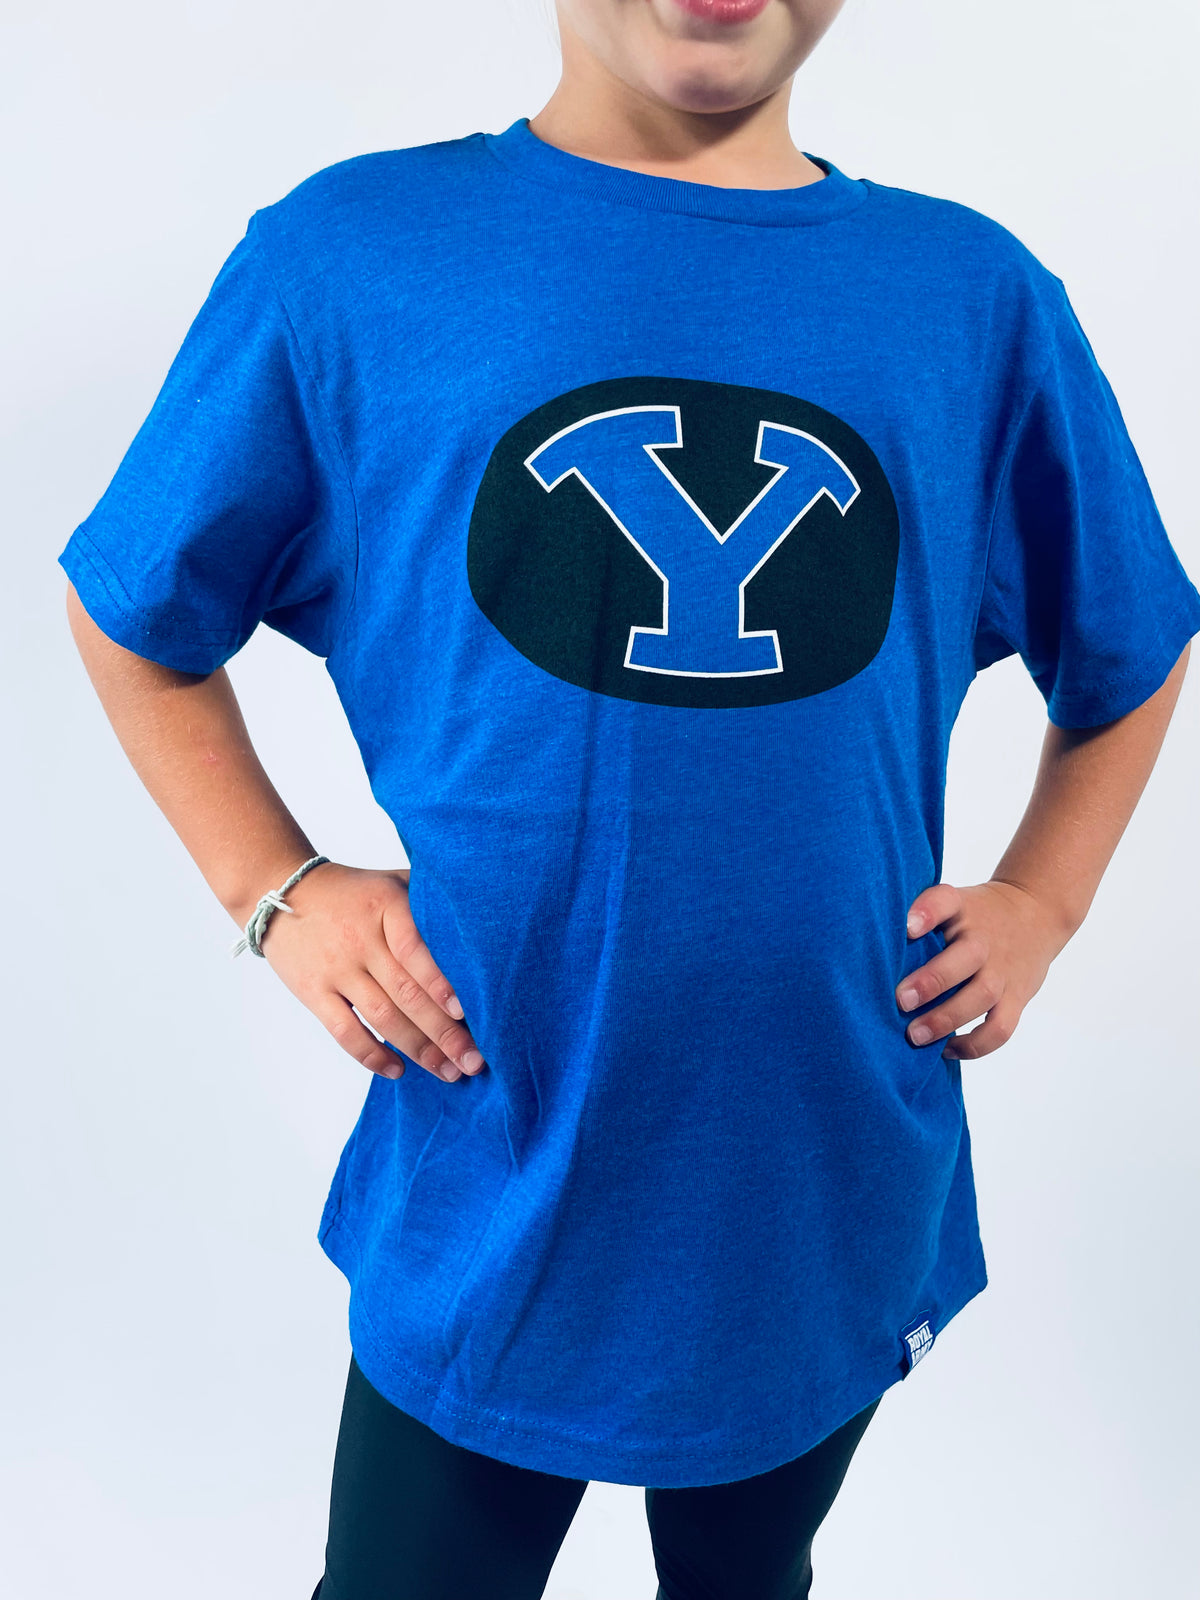 Kids Royal T-Shirt with Black, White and Royal BYU Stretch Y